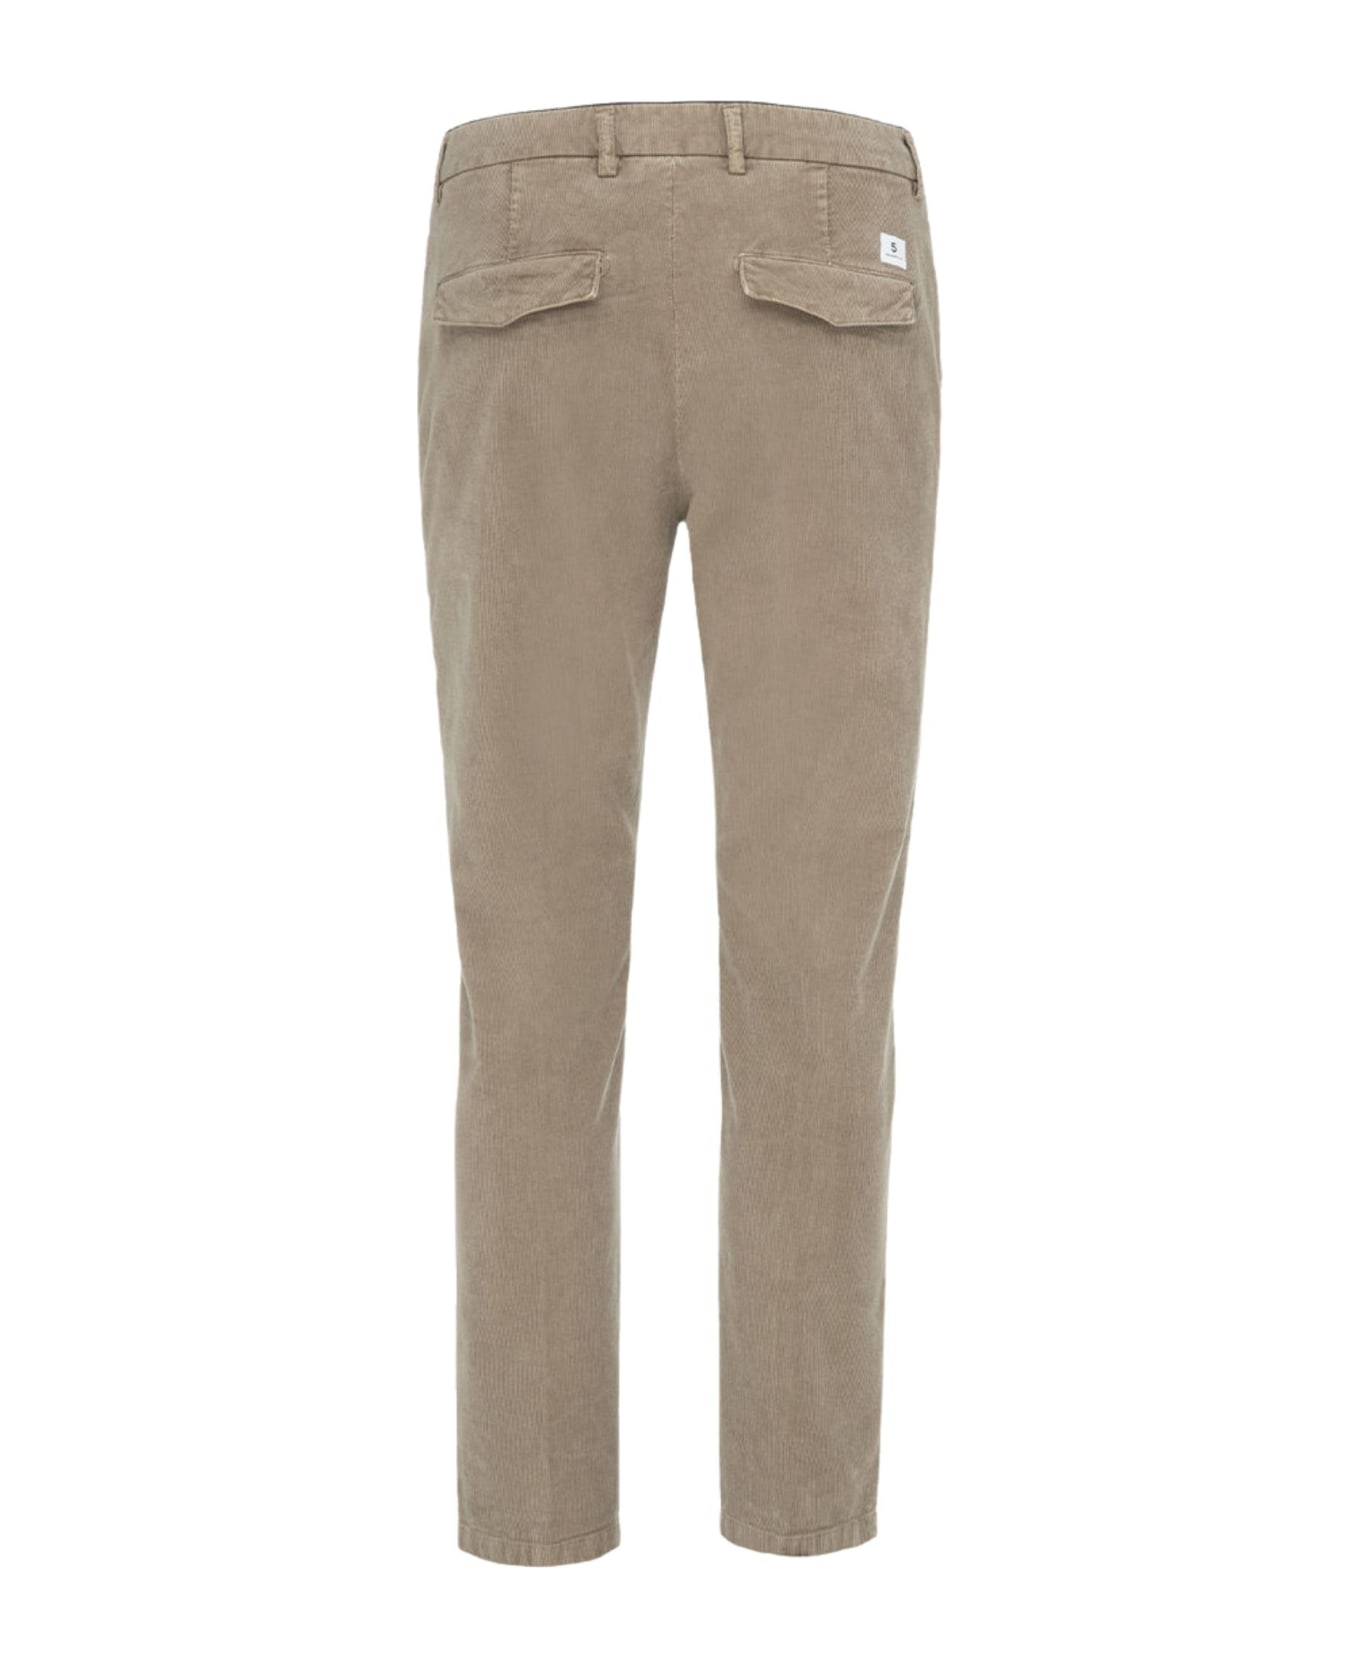 Department Five Prince Pences Chinos - Taupe ボトムス